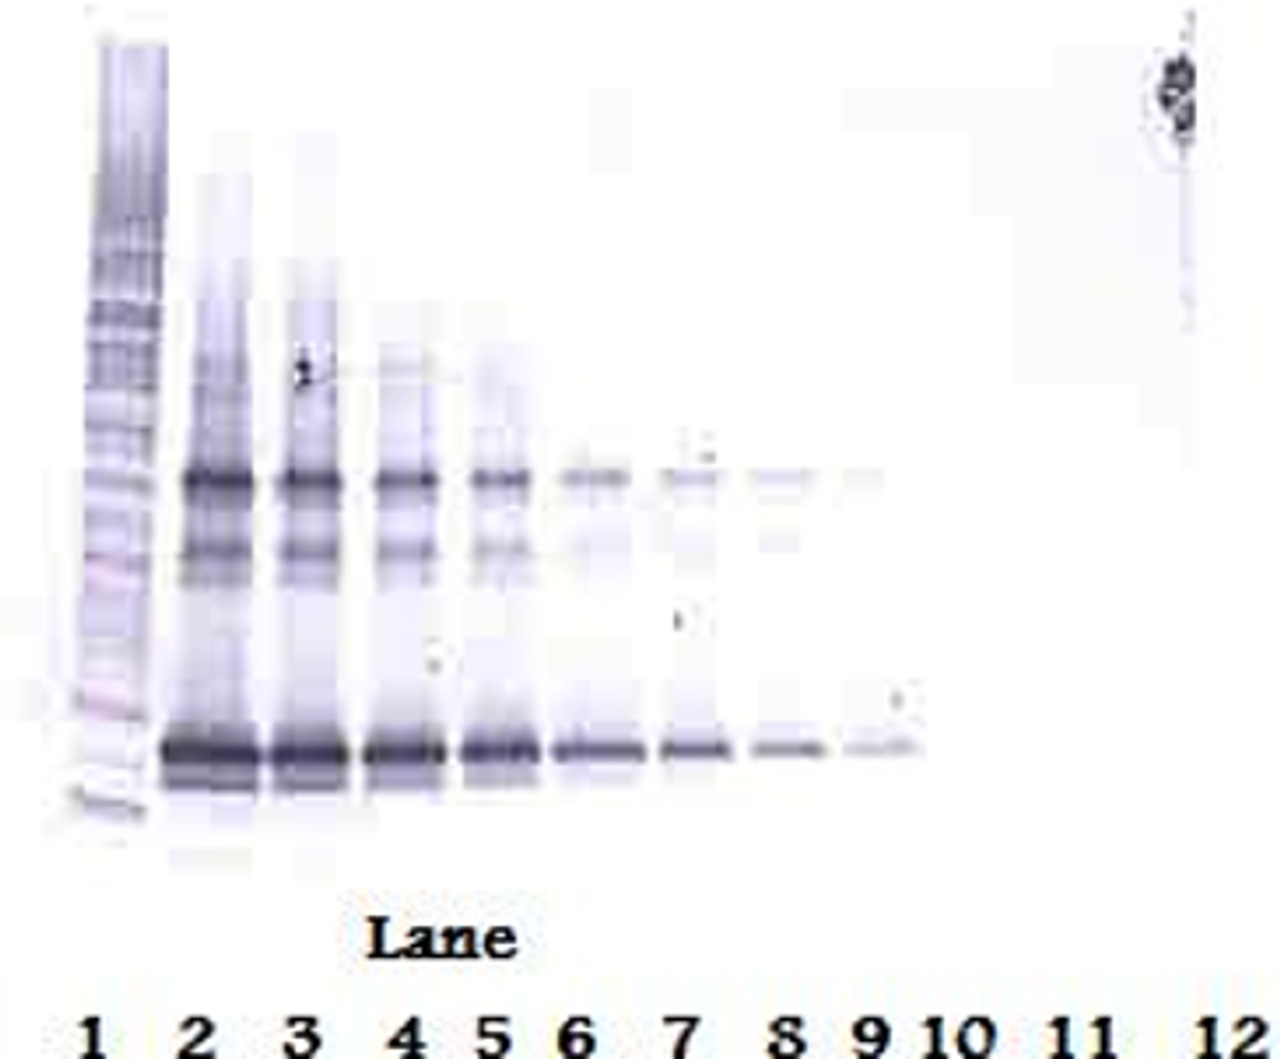 To detect hLIGHT by Western Blot analysis this antibody can be used at a concentration of 0.1 - 0.2 ug/ml. Used in conjunction with compatible secondary reagents the detection limit for recombinant hLIGHT is 1.5 - 3.0 ng/lane, under either reducing or non-reducing conditions.